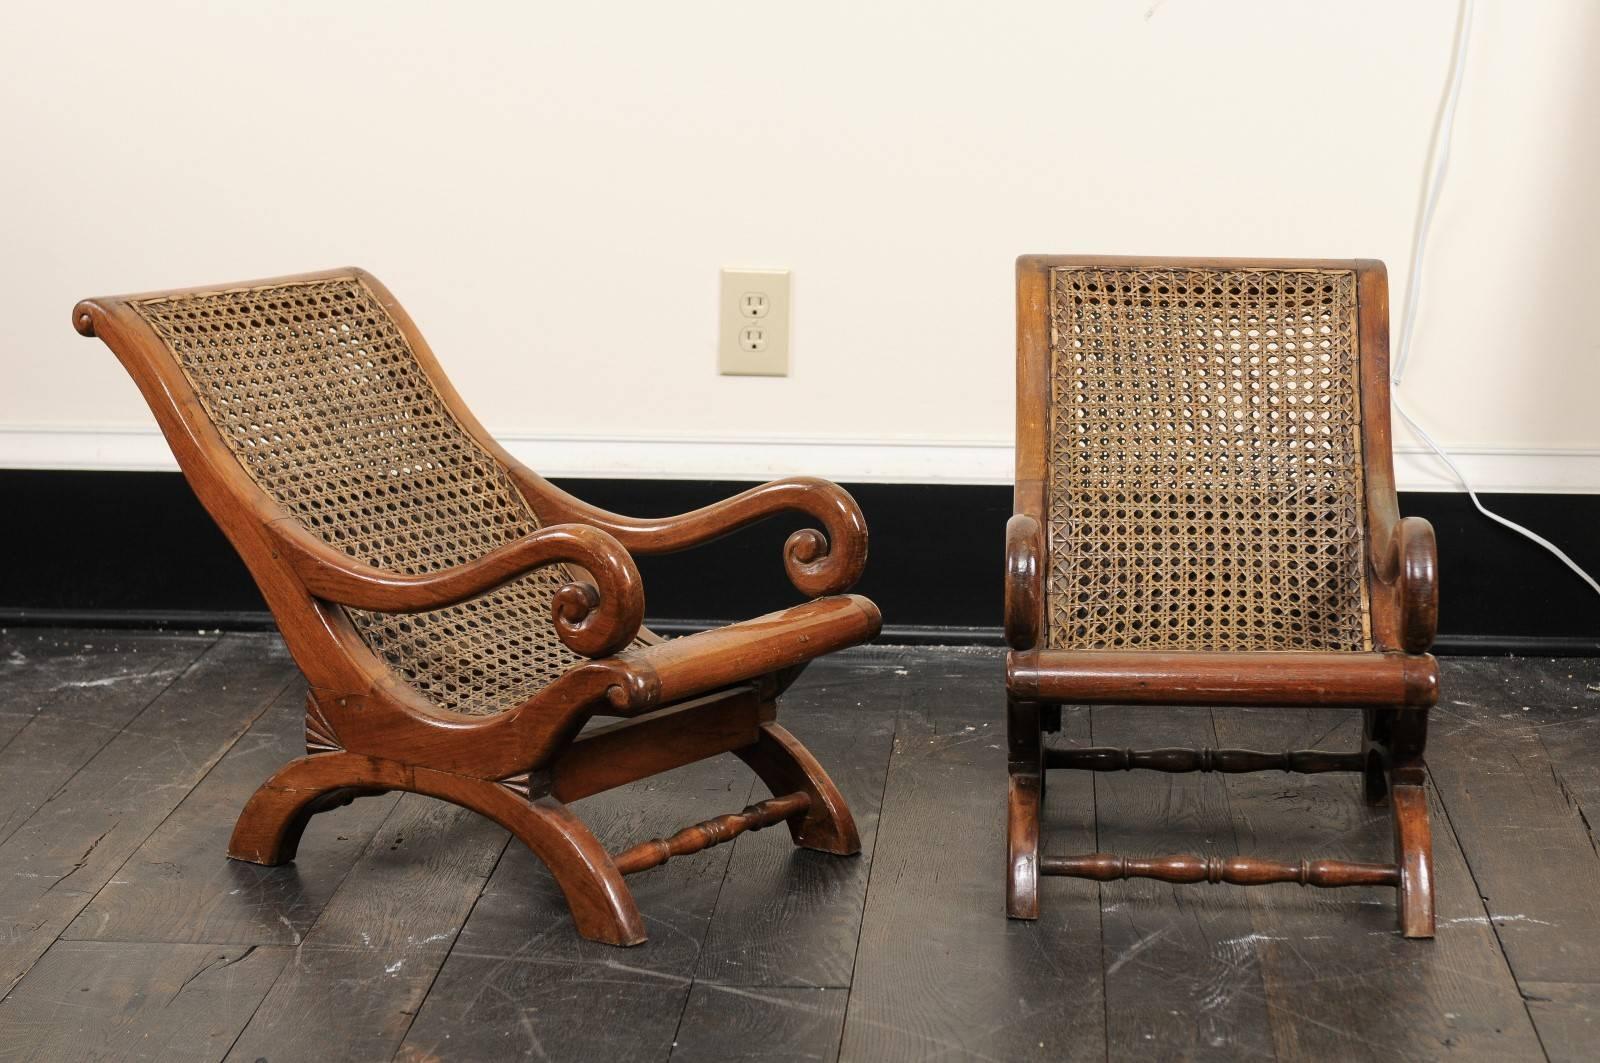 Pair of 19th century English children's chairs. This pair of antique English chairs feature cane seat and backs with curvy teak wood frames. The carved teak arms curl into scrolled knuckles. The legs are designed of two c-shaped pieces, supported by